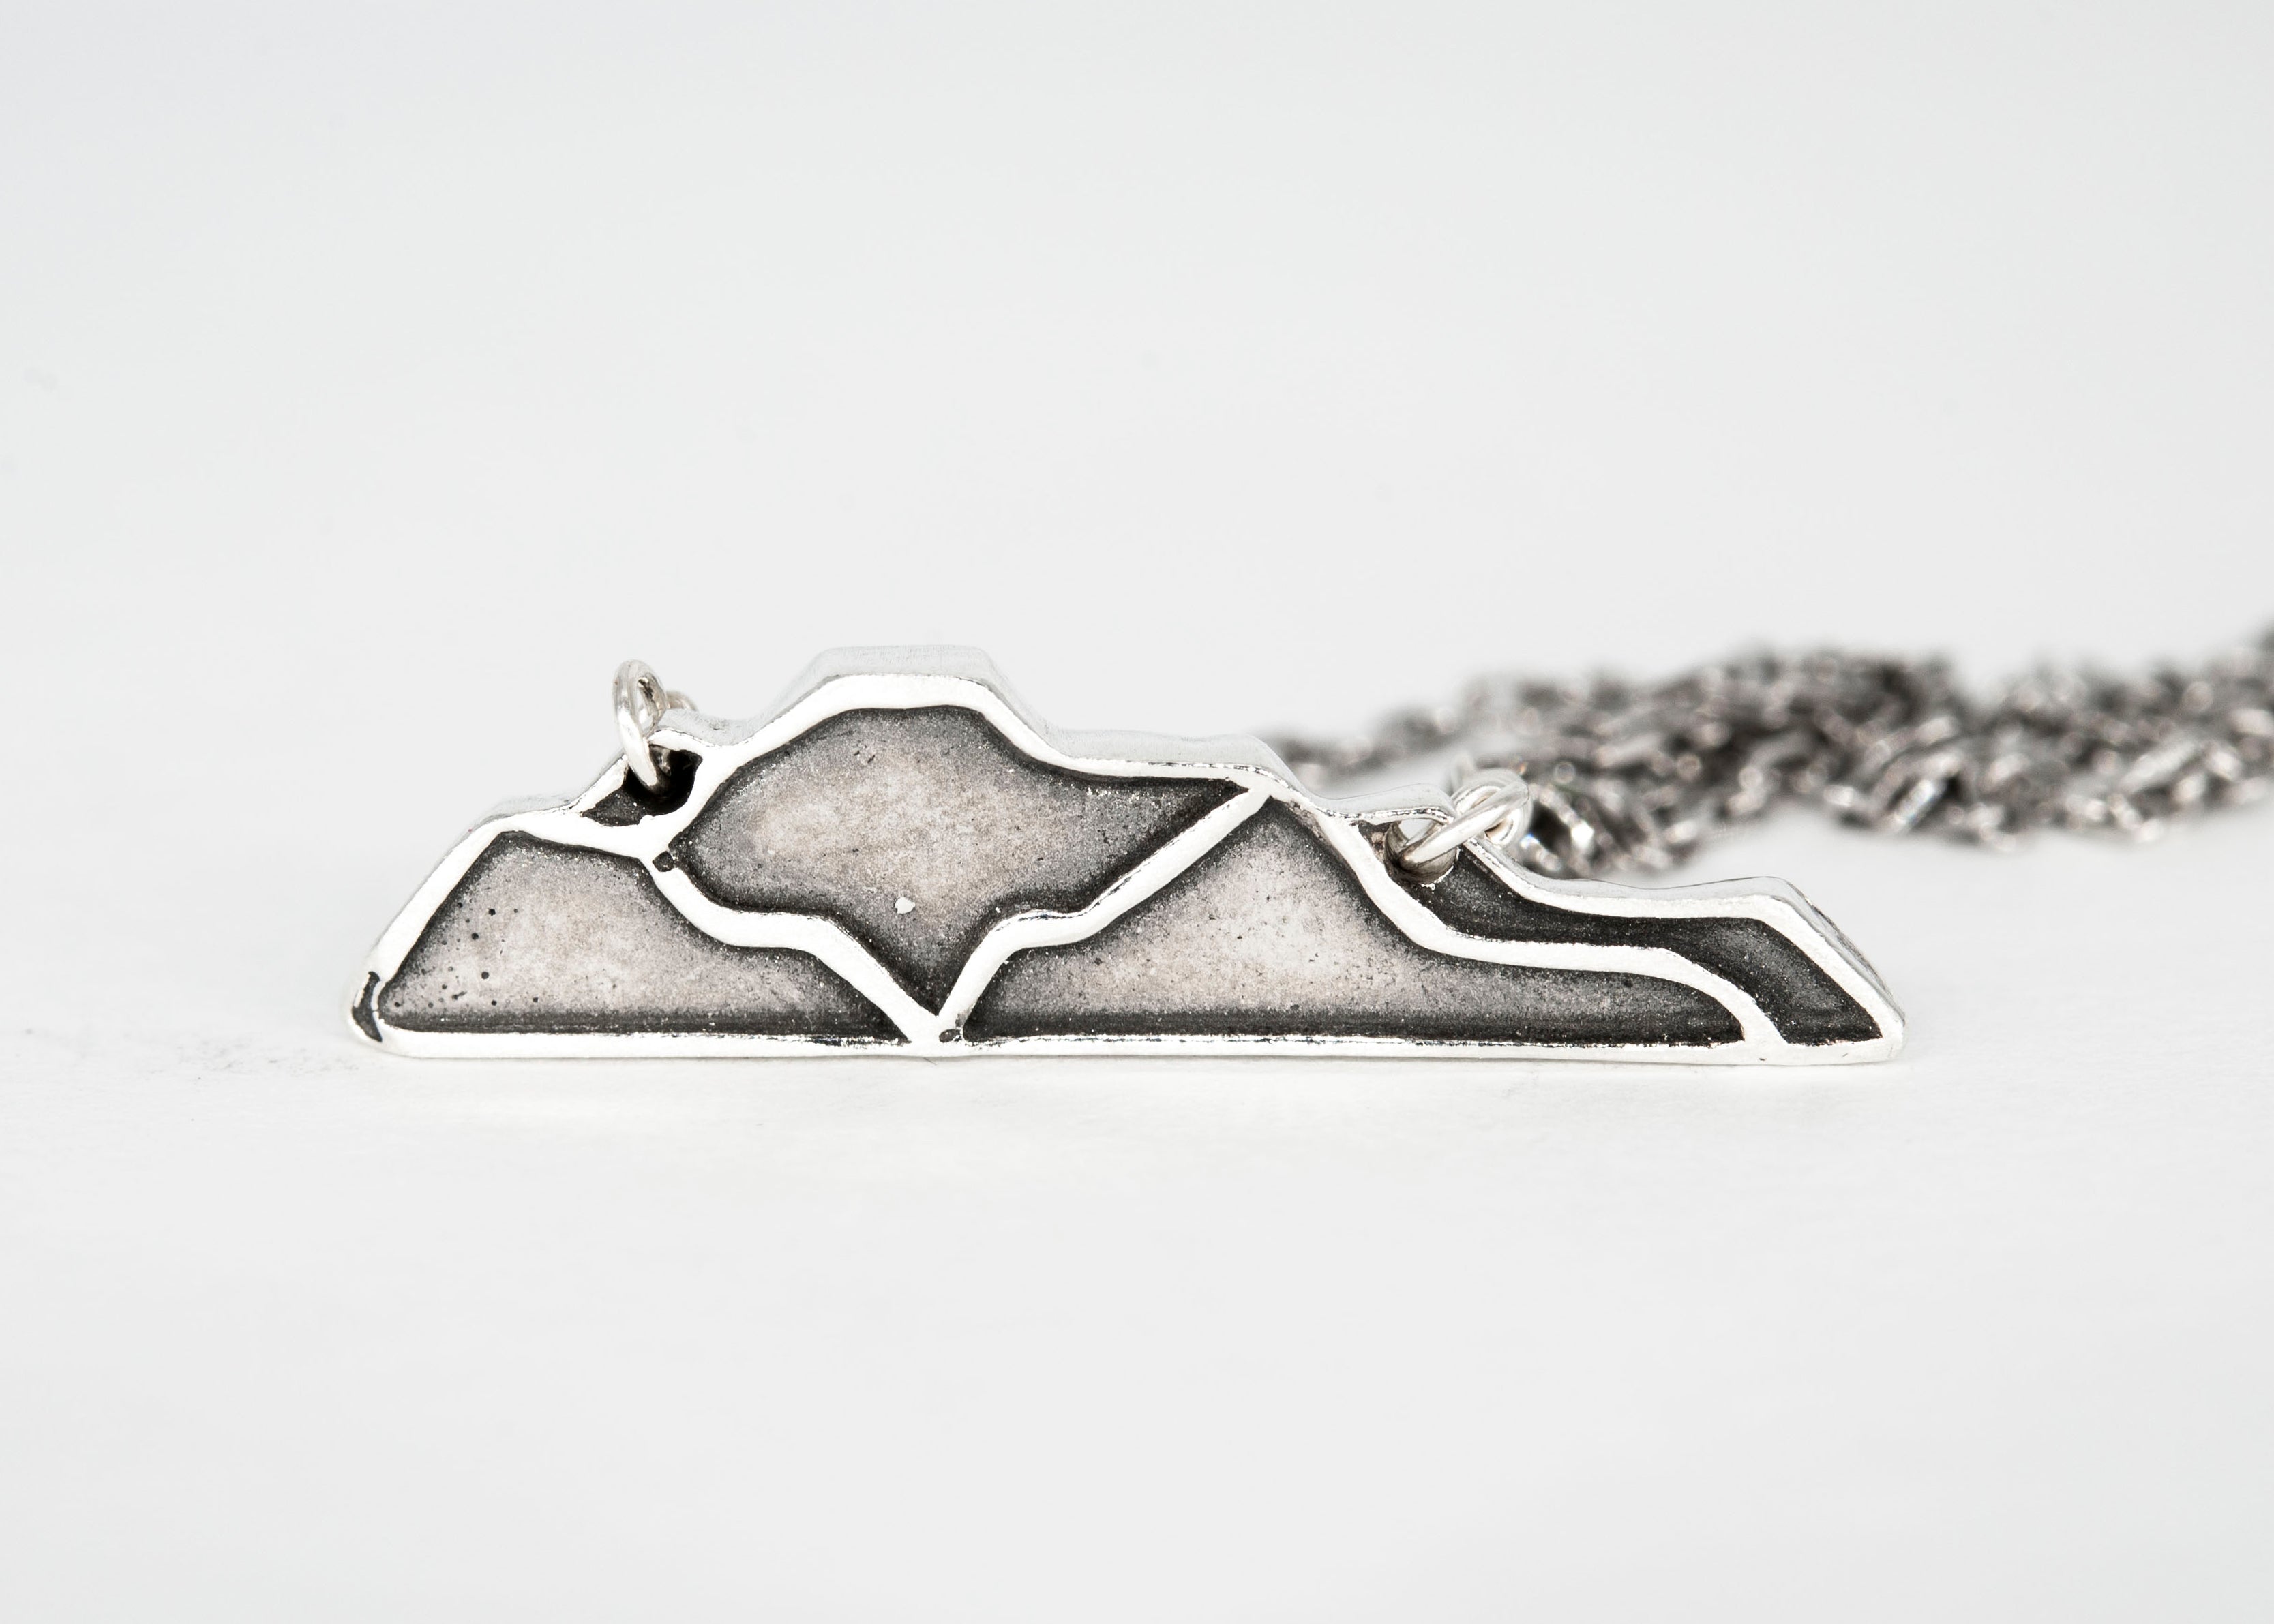 Knox Mountain Necklace